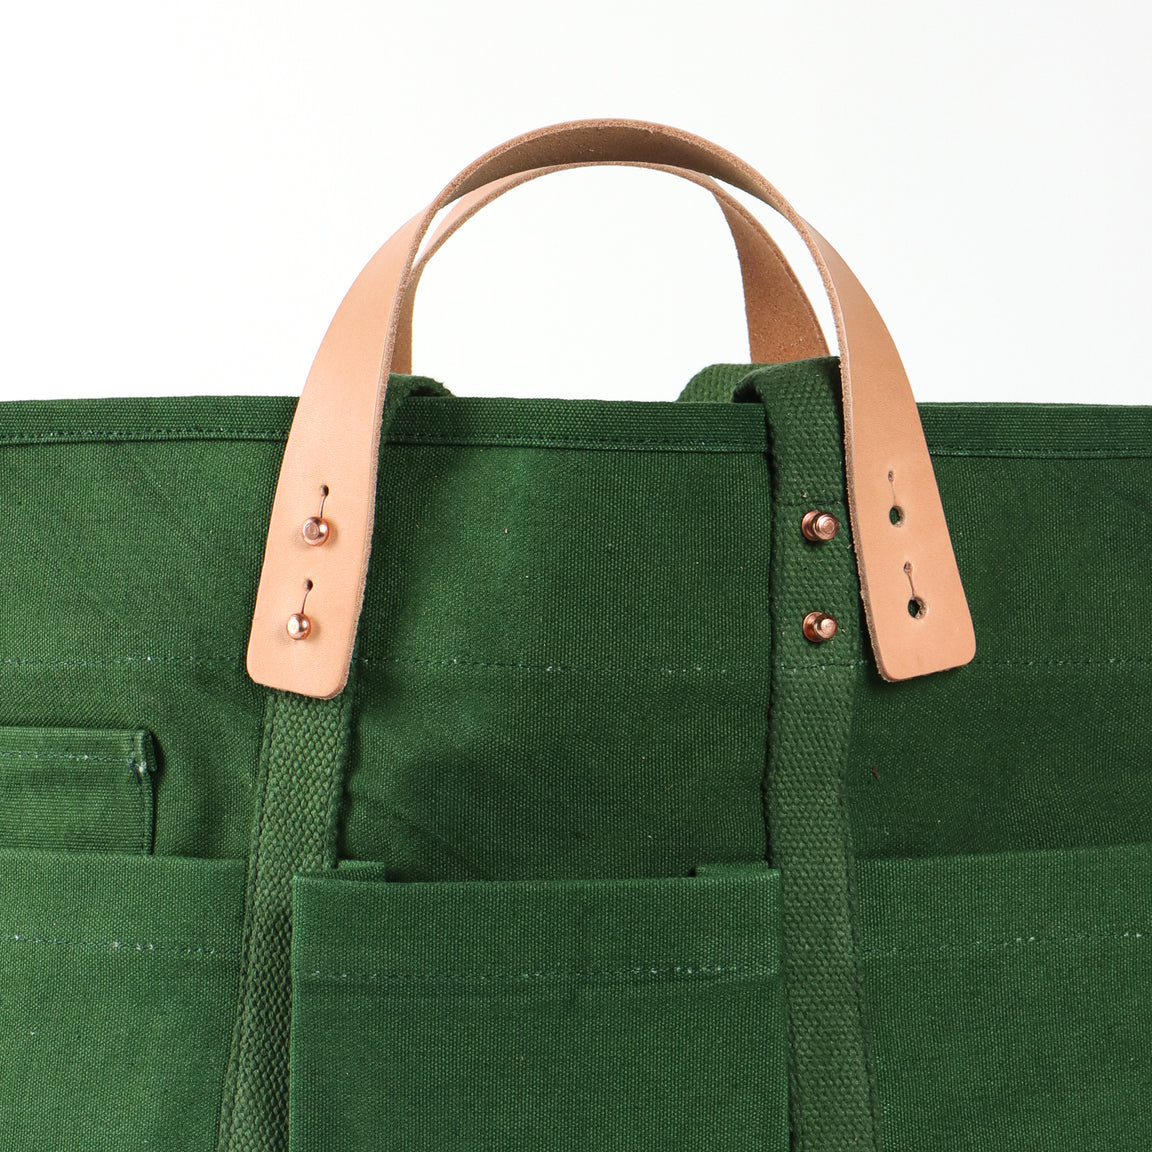 Construction Tote- Pine